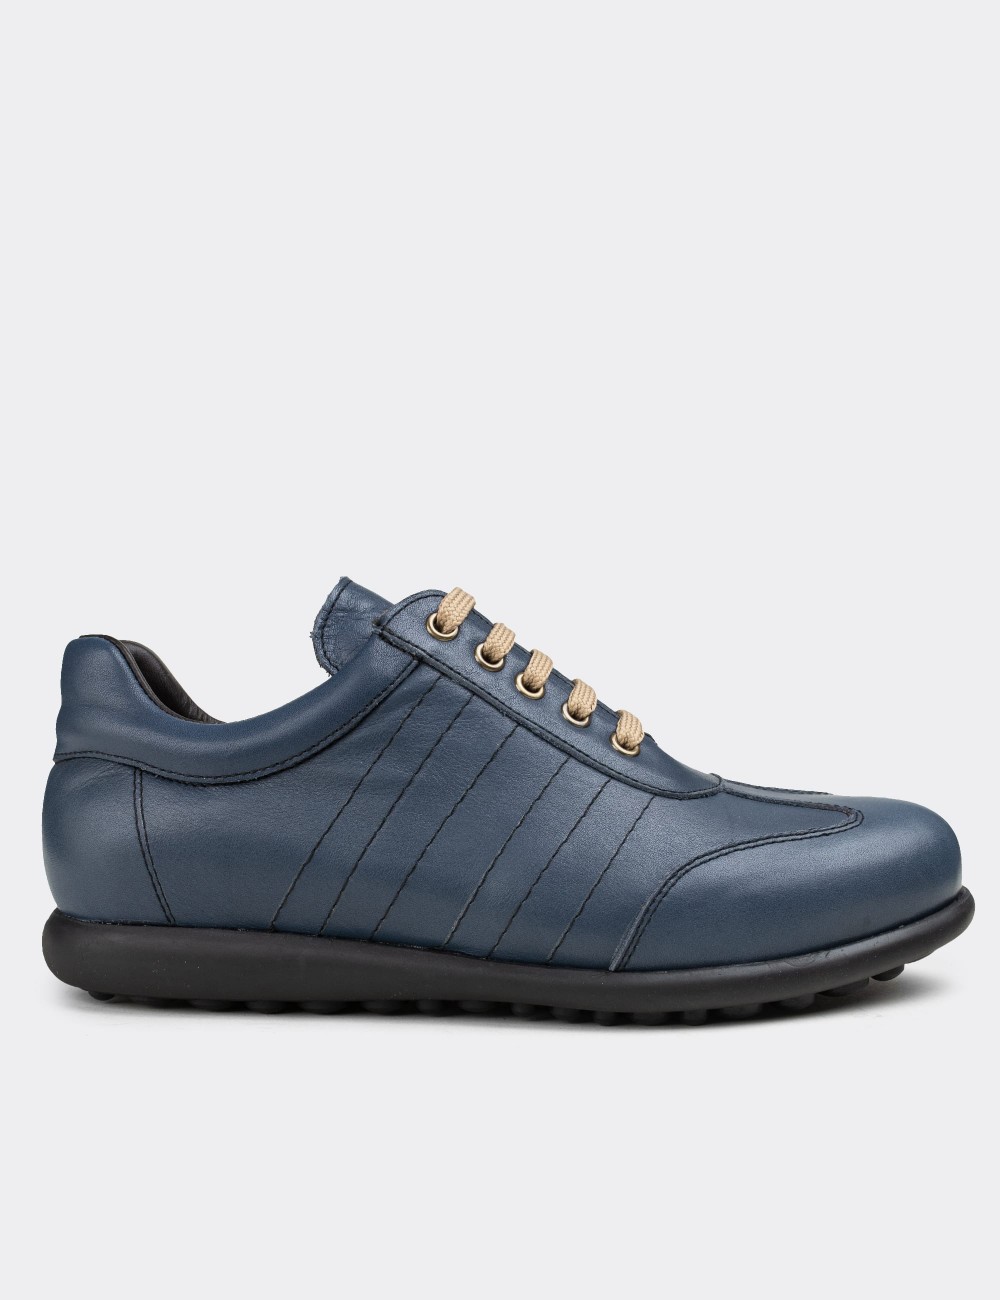 Blue  Leather Lace-up Shoes - 01826MMVIC03